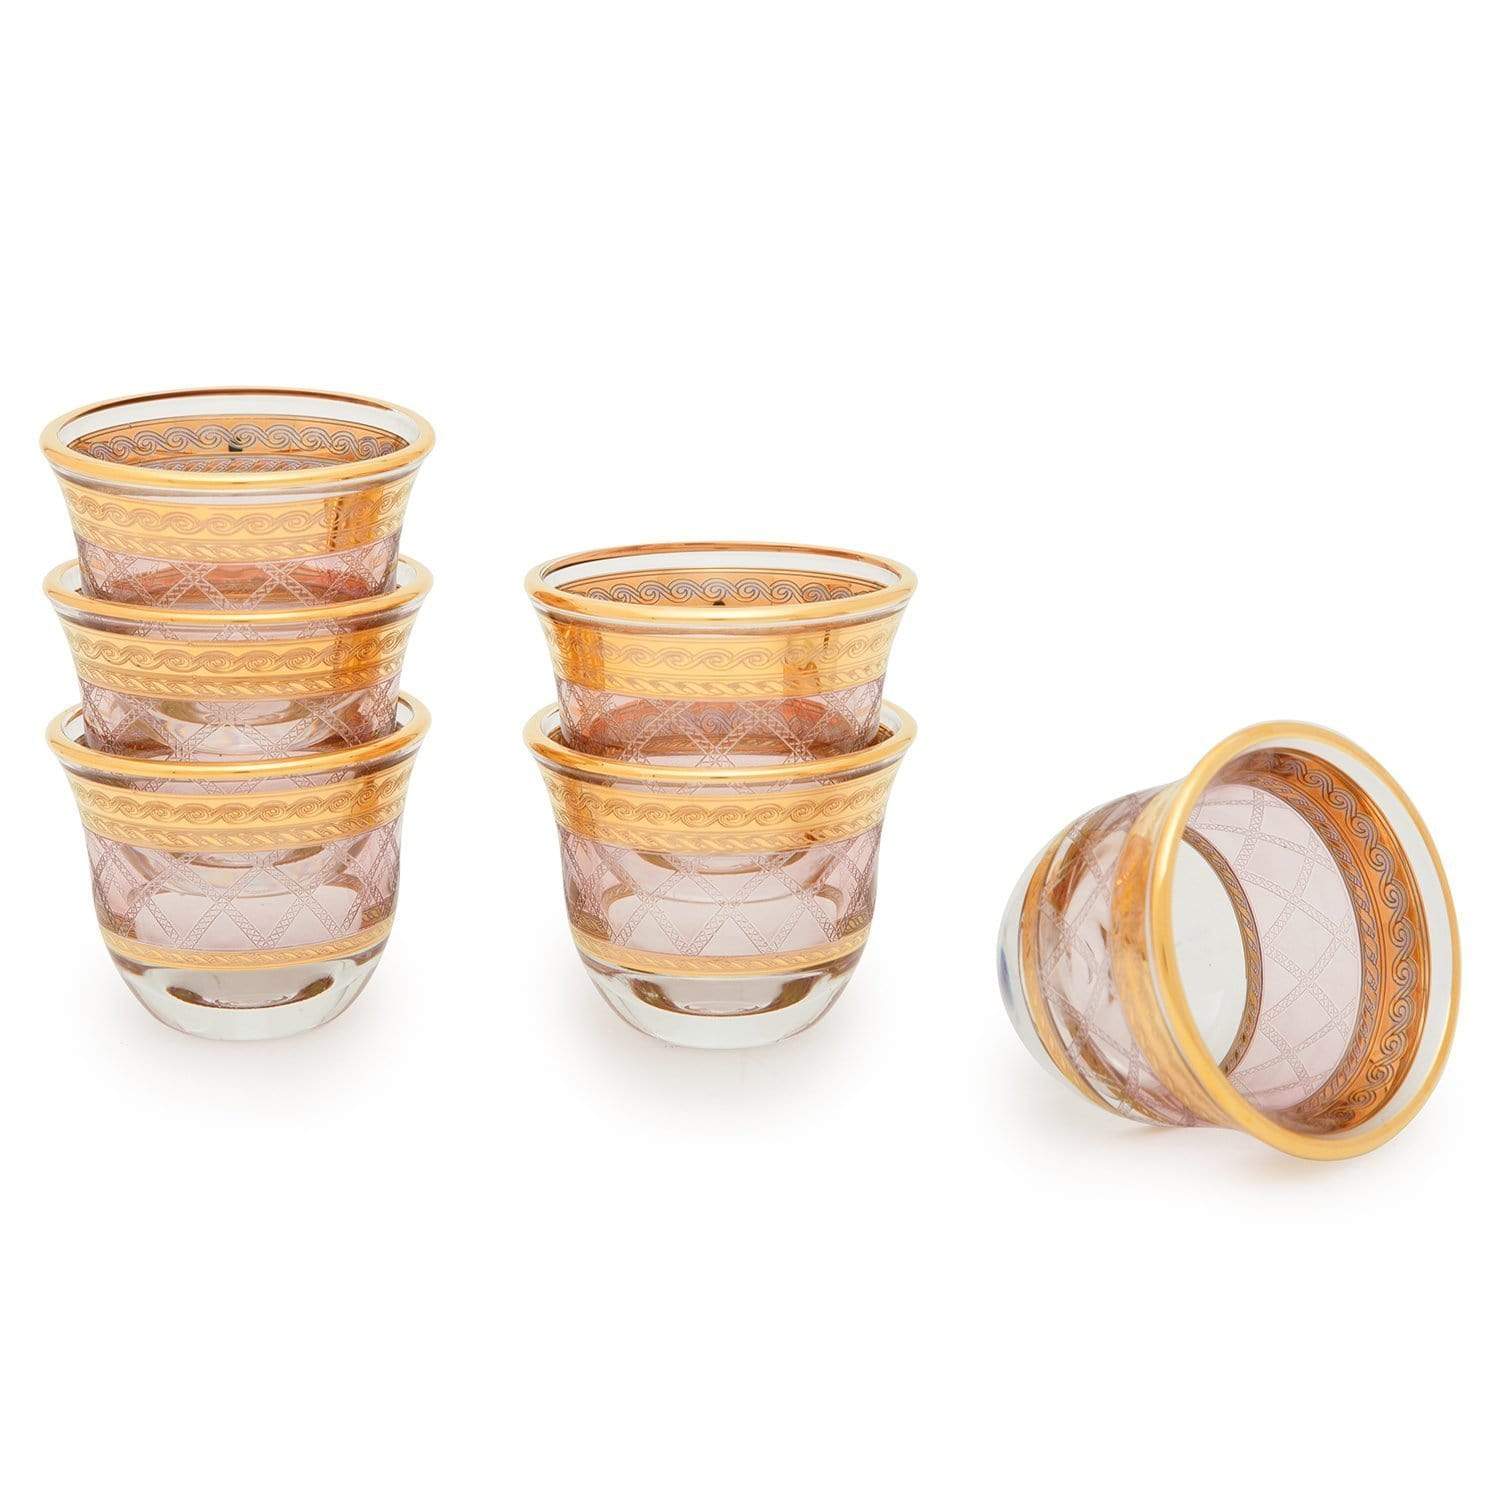 Combi Kolleen Mocca Cup Set - Gold and Pink, 6 Piece - G761Z/48 - Jashanmal Home